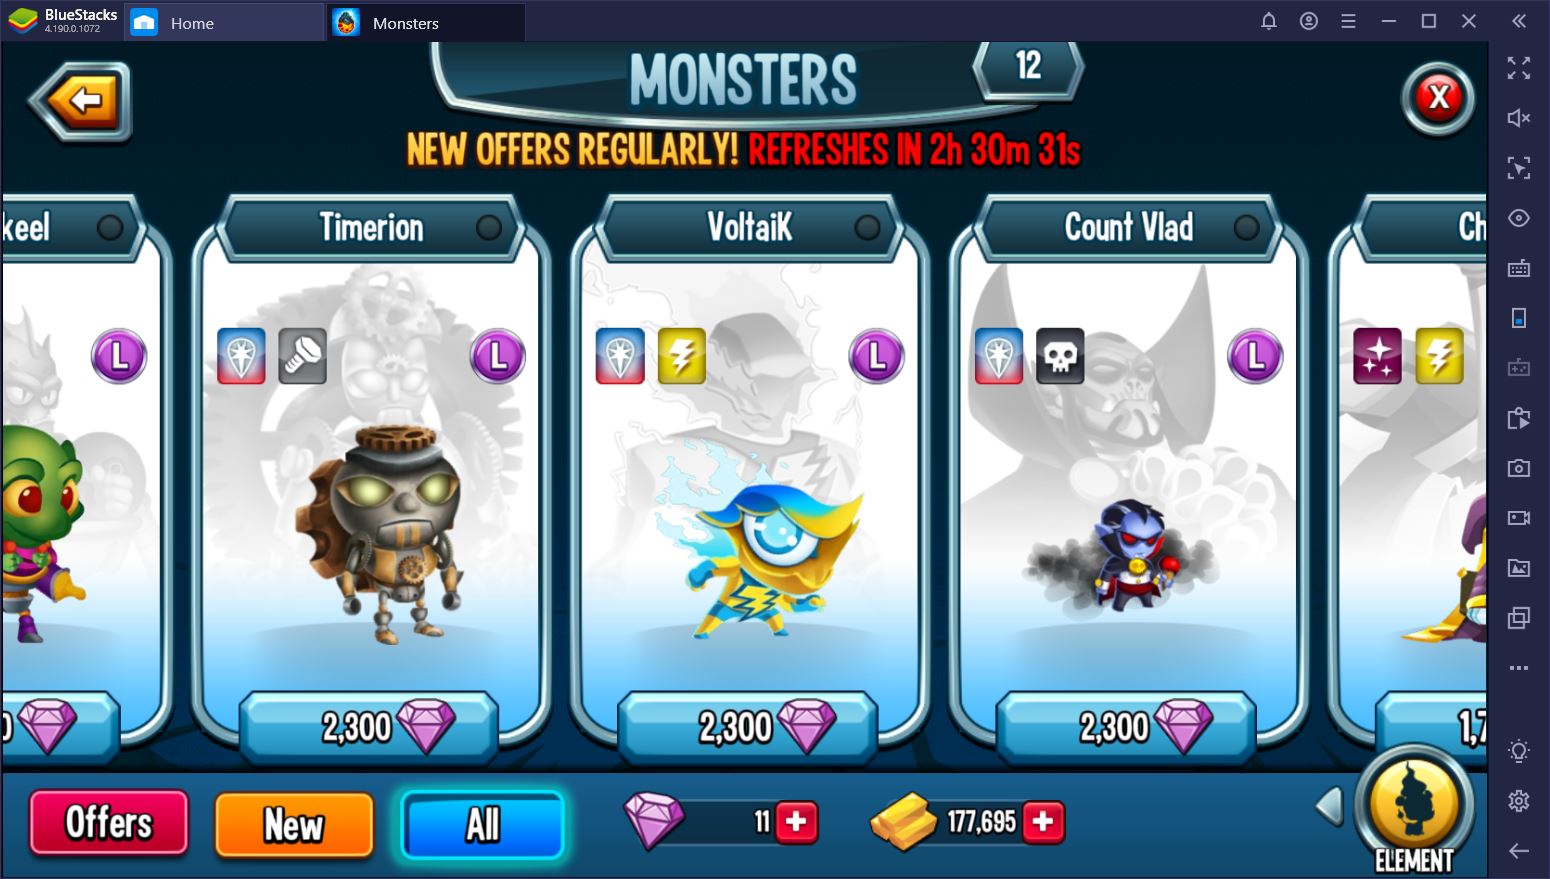 Monster Legends on PC – Guide to Team Composition